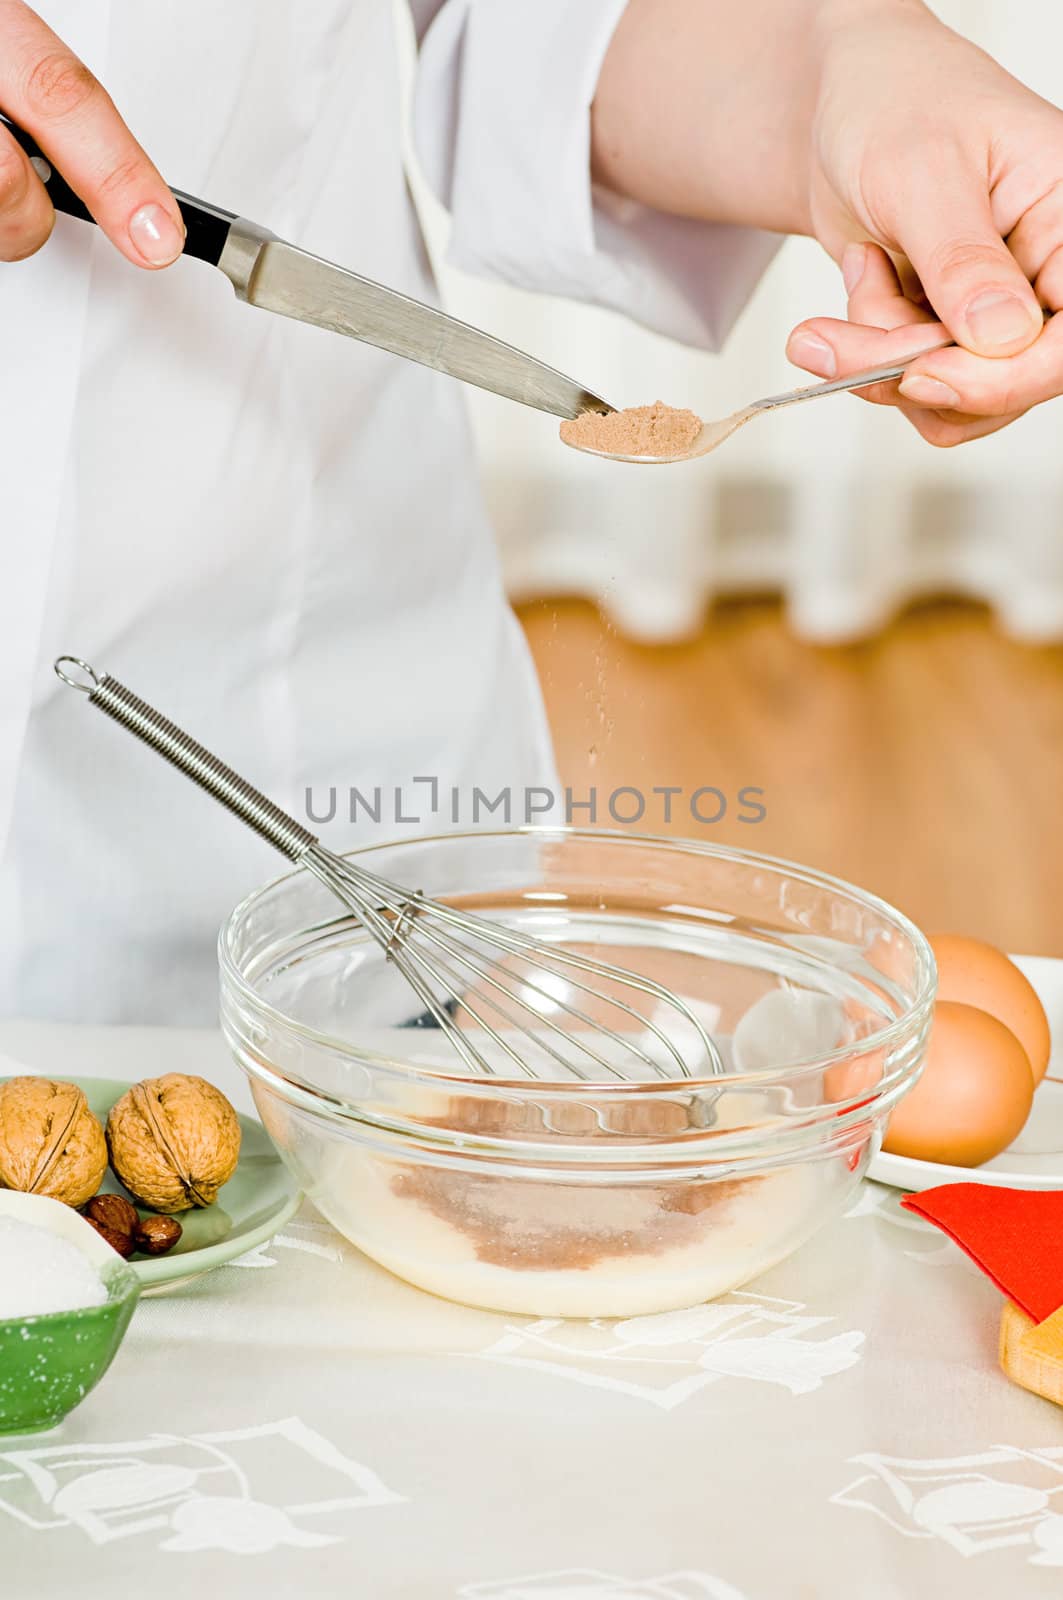 Preparation of food from eggs and other ingredients